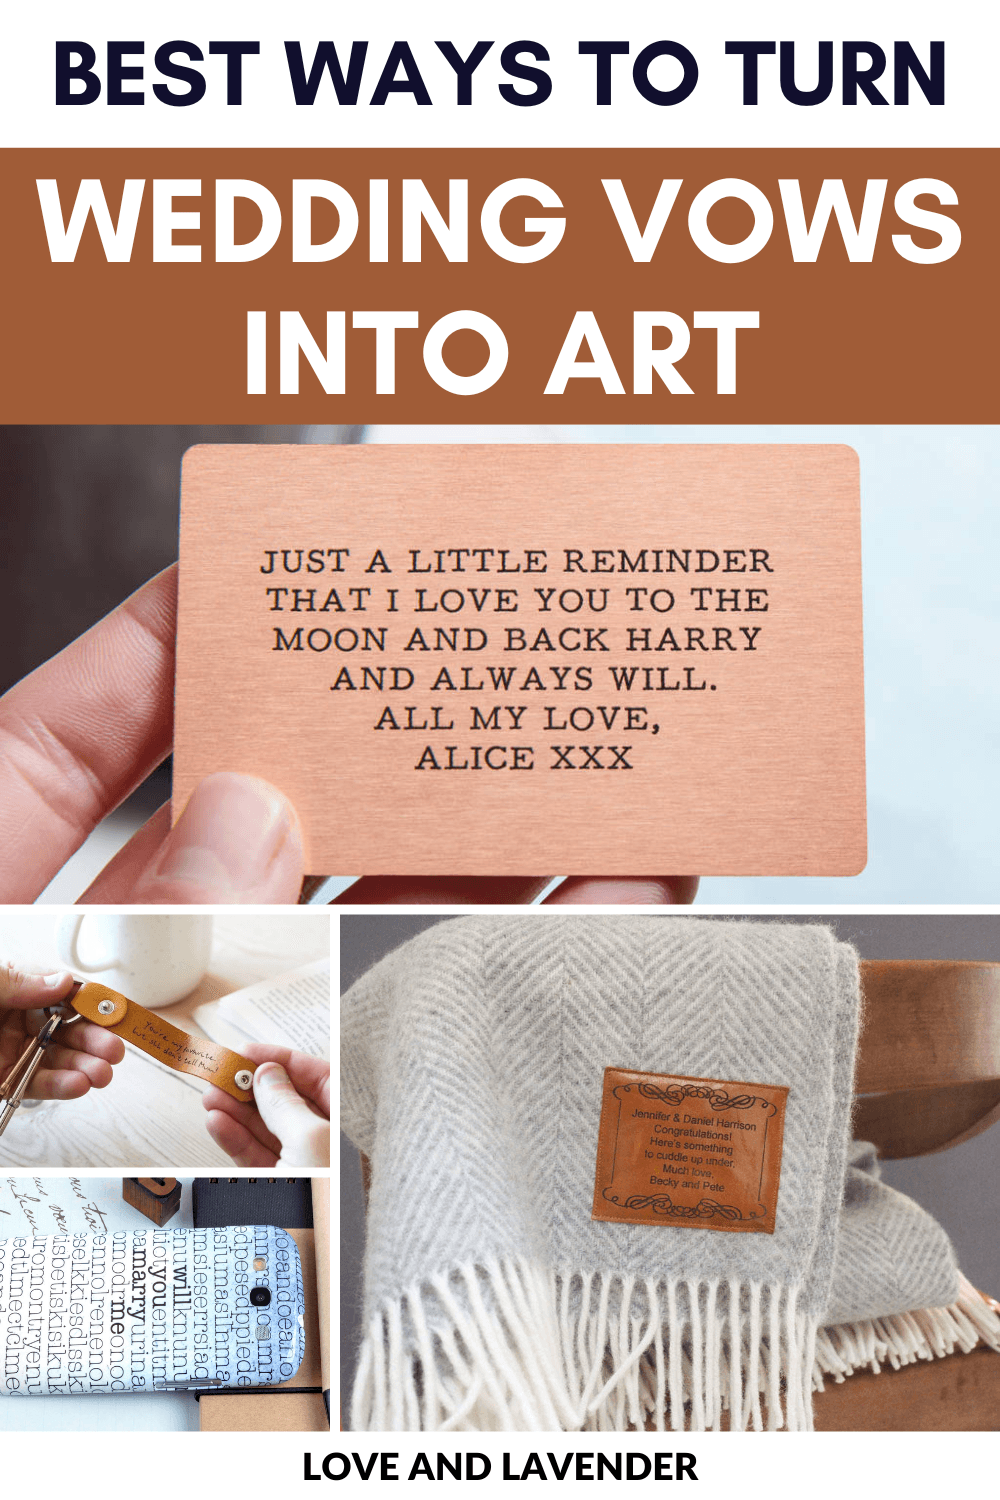 Wedding vow art can be displayed during the ceremony, worn by bride and groom as part of their outfits or used as a keepsake. Here are some unique ideas we researched to turn your wedding vows into works of art. Don't miss it!